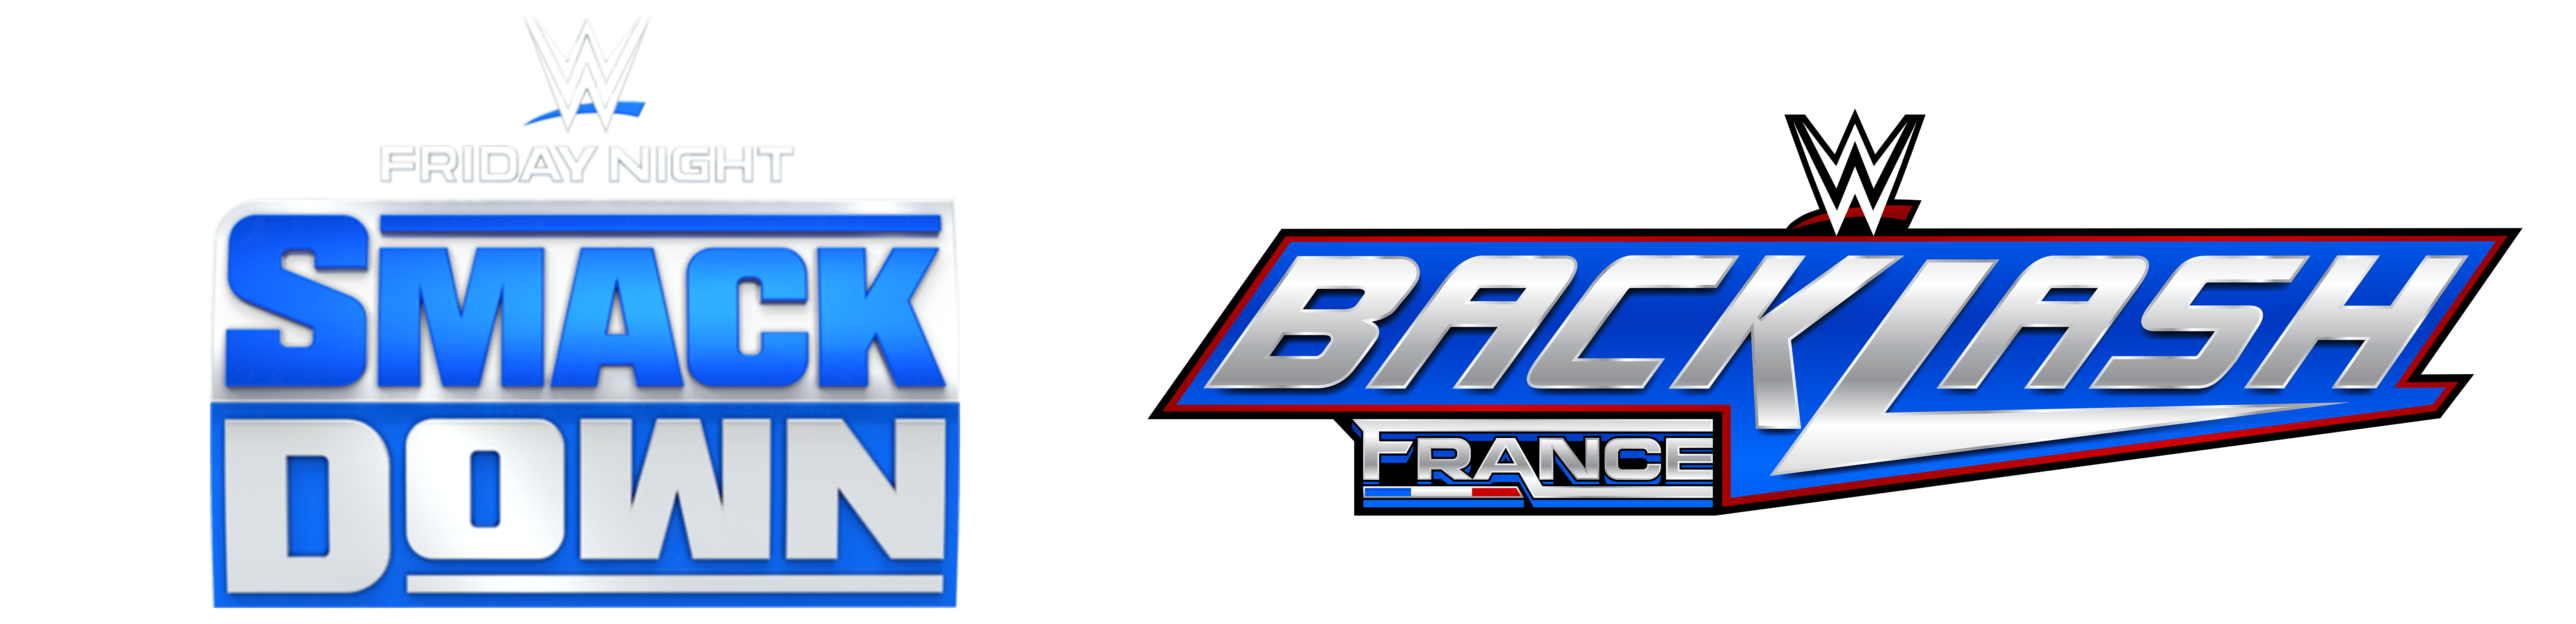 Friday Night SmackDown and Backlash in France